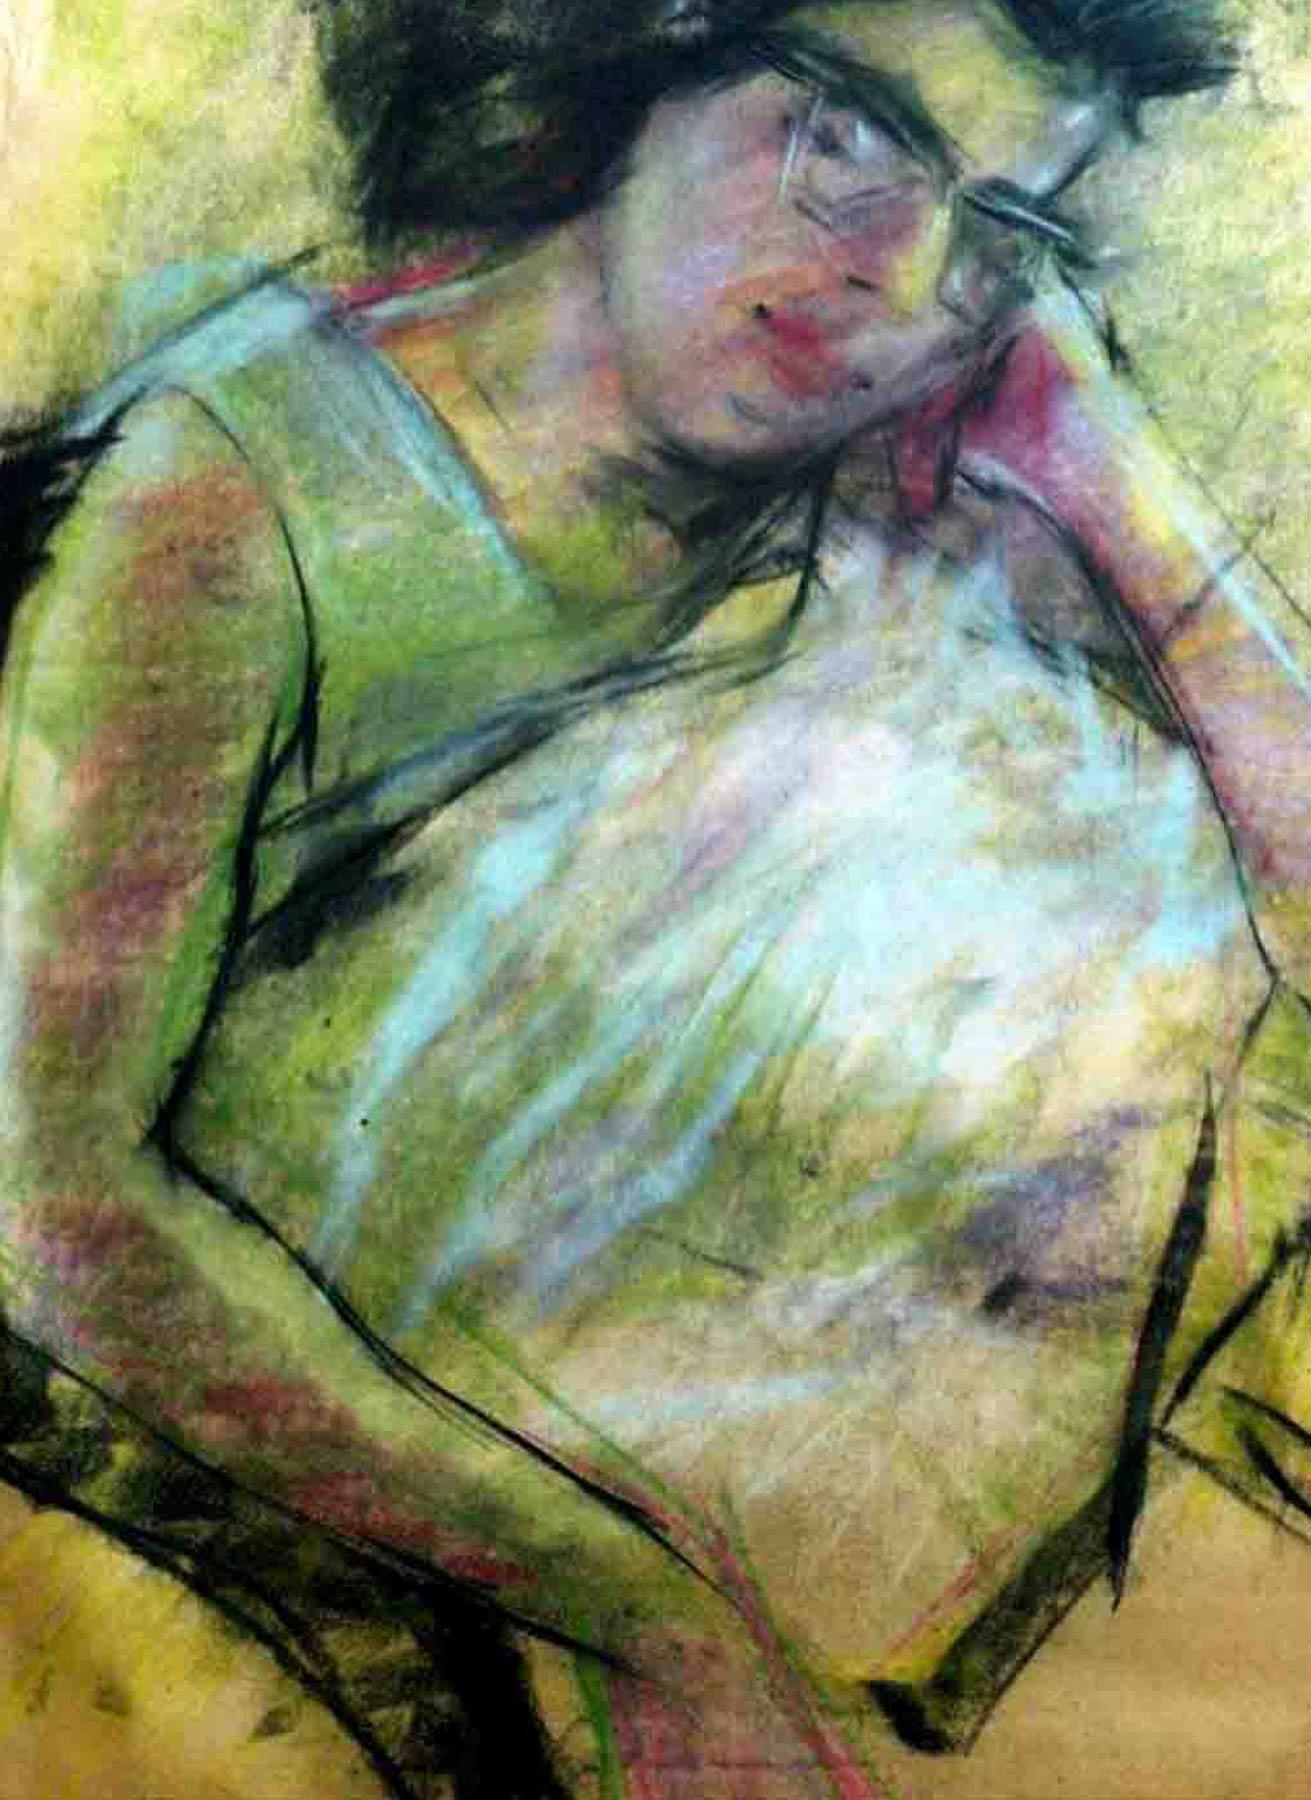 Bikash Bhattacharjee - Untitled - 36 x 22 inches (unframed size)
Dry Pastel on Paper
Inclusive of shipment in roll form. 

Style : Bikash Bhattacharya is credited with bringing realism back to Indian art at a time when artists in India were leaning